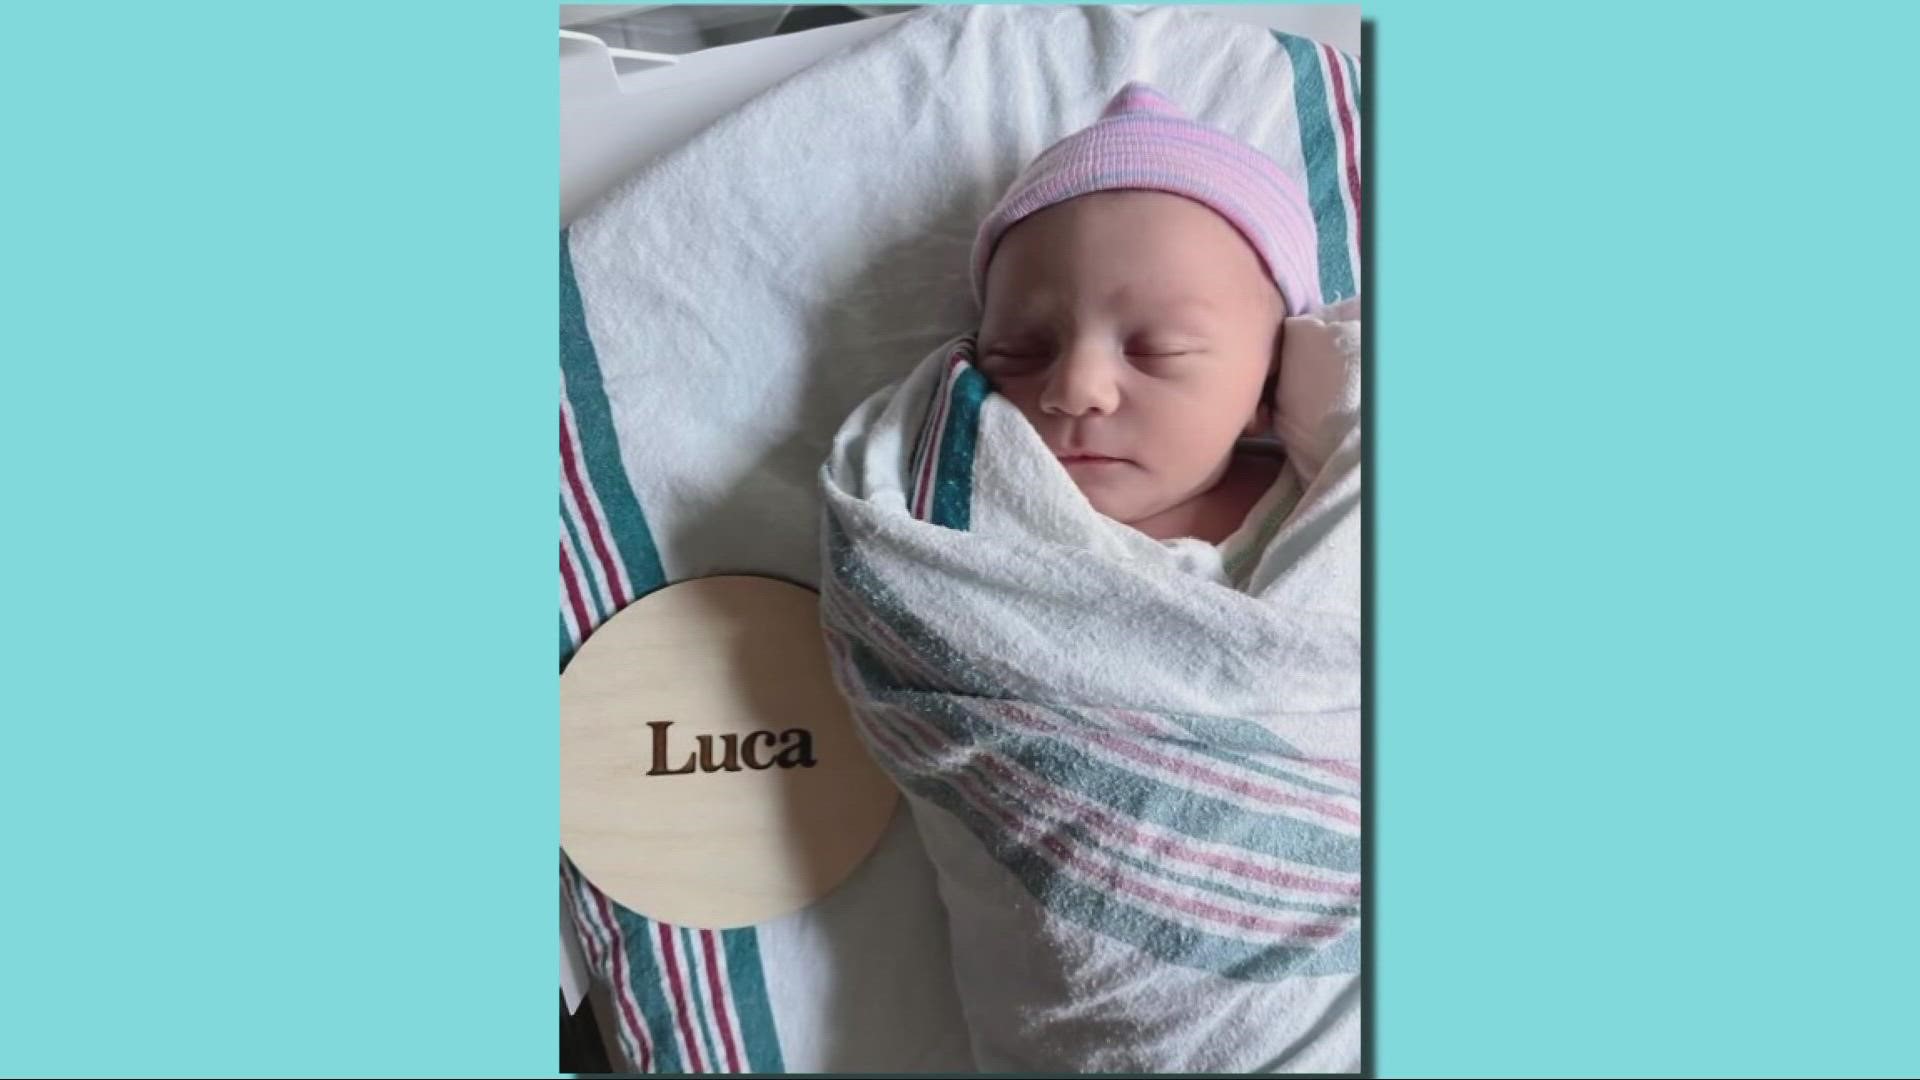 Luca joins Isla as part of Sara and Angelo's ever-growing family!